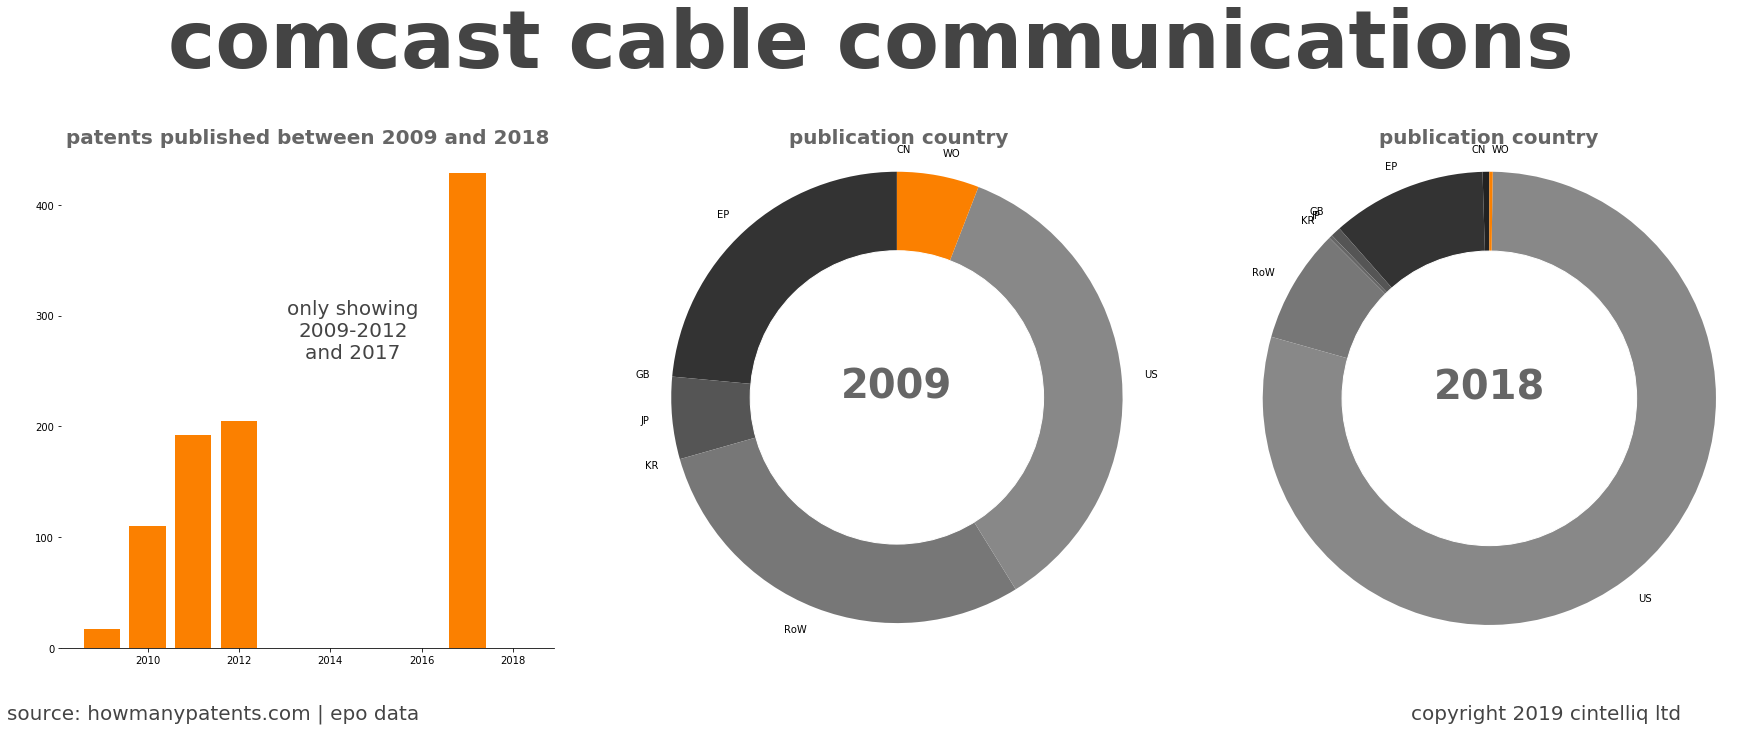 summary of patents for Comcast Cable Communications